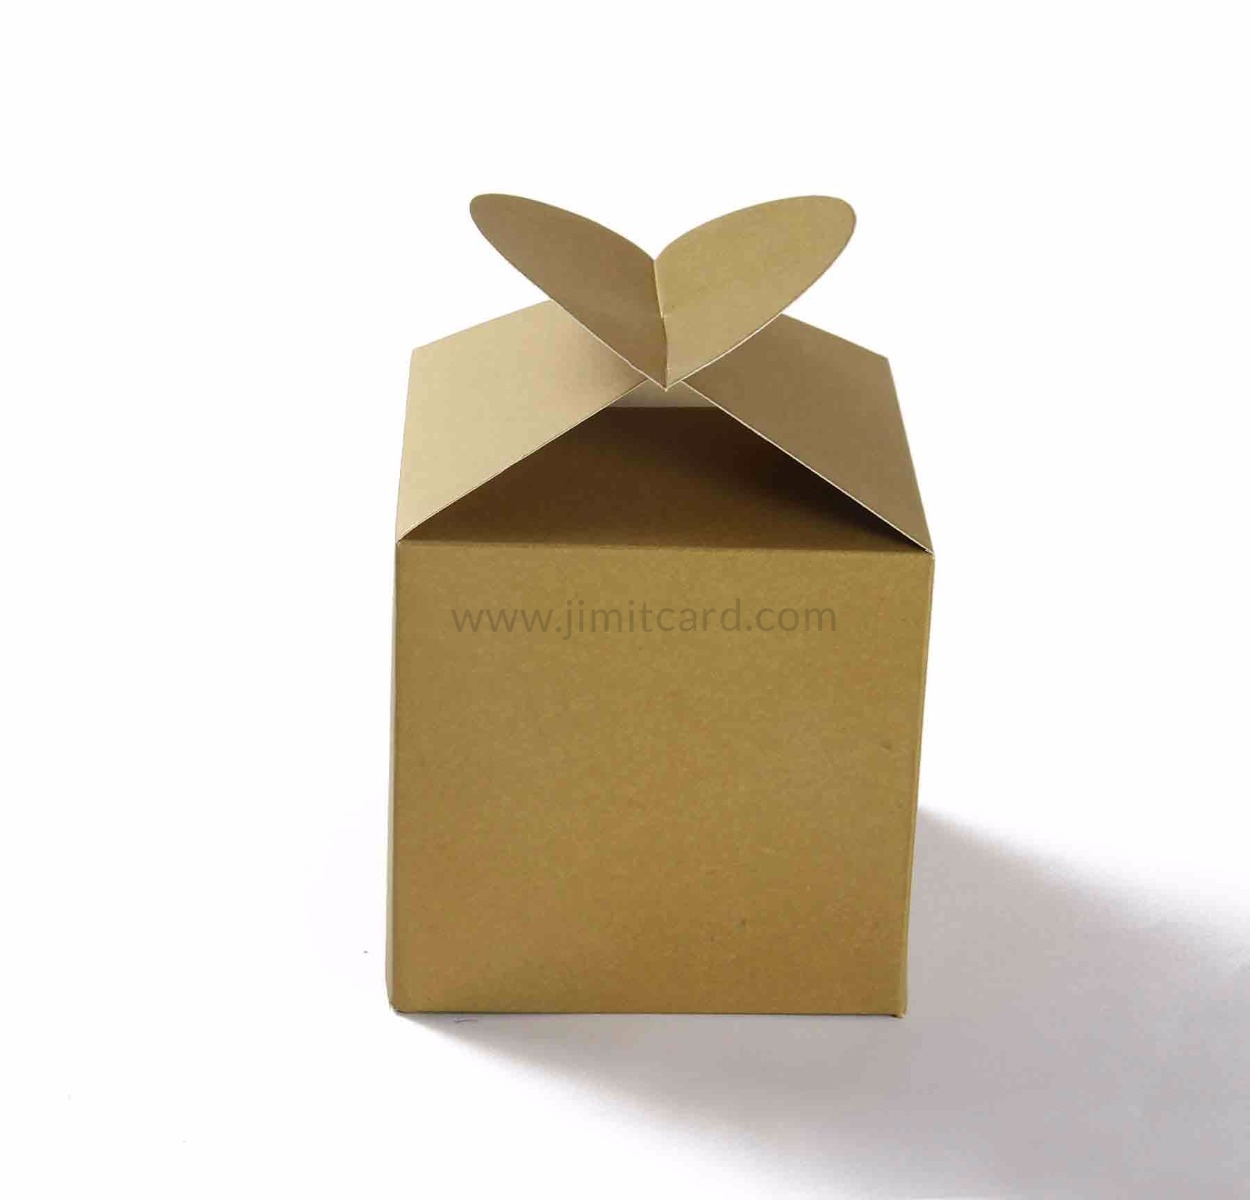 Square Wedding Party Favor Box in Golden Color with a Holder